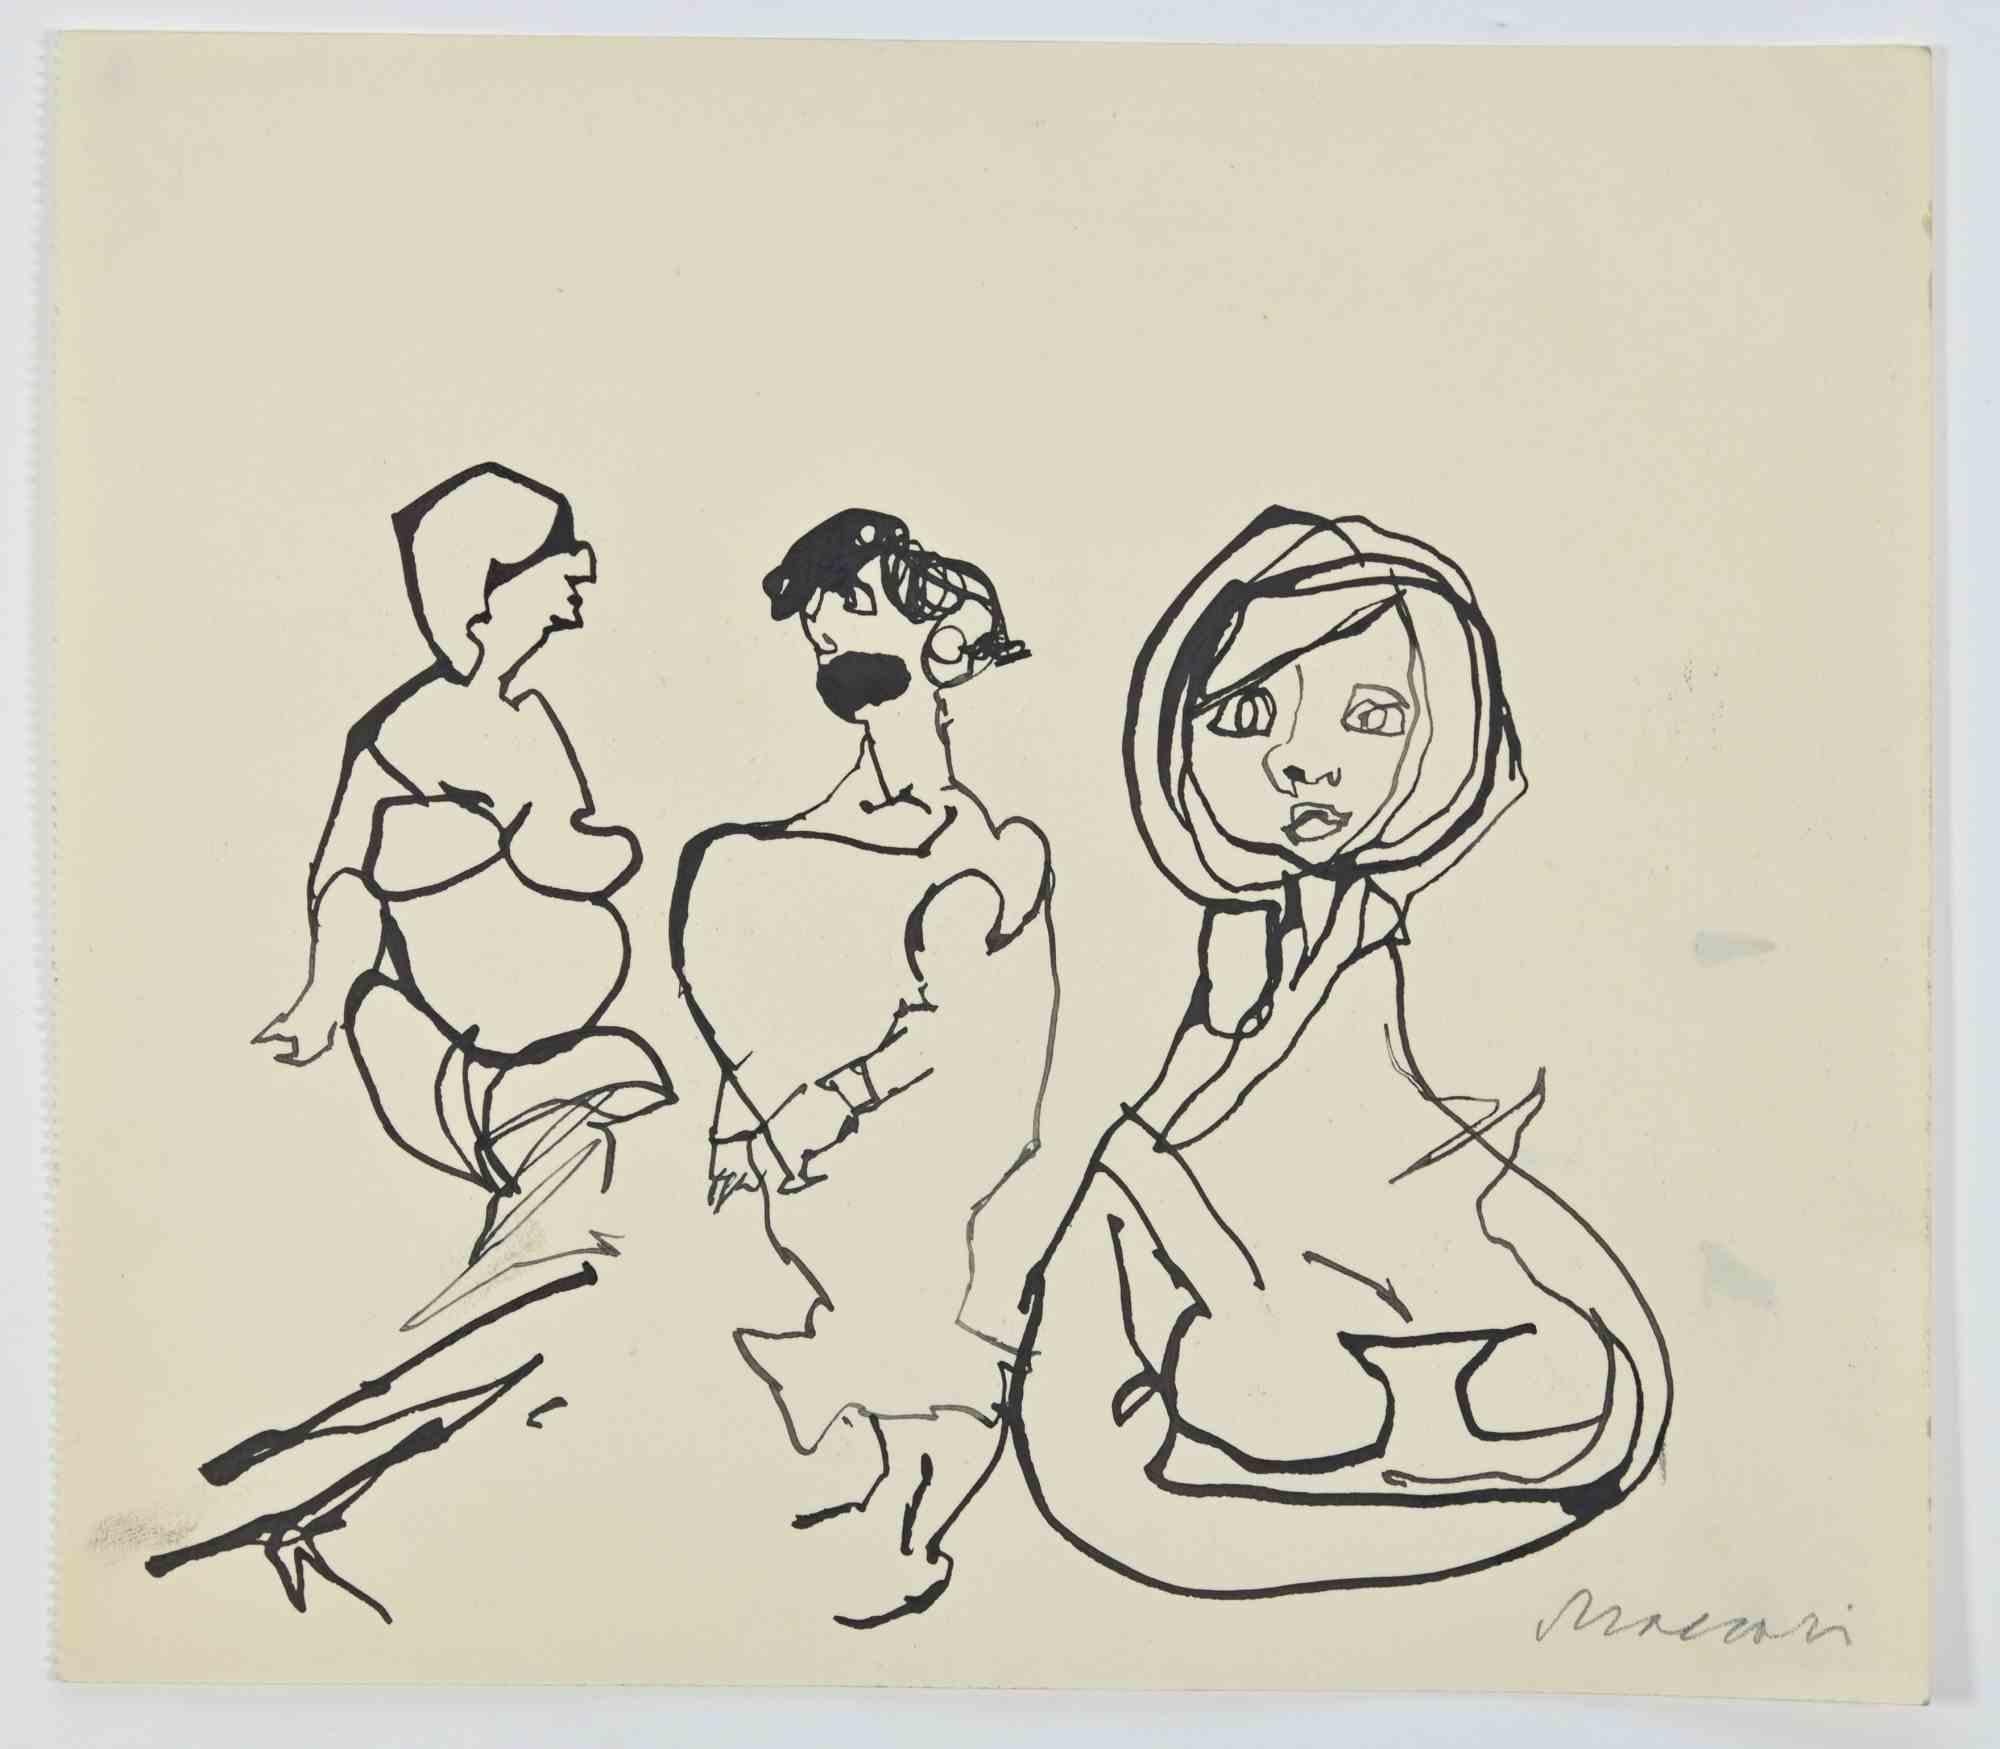 Seductive Woman is a China ink Drawing realized by Mino Maccari  (1924-1989) in the 1960s.

Hand-signed on the lower margin.

Good condition.

Mino Maccari (Siena, 1924-Rome, June 16, 1989) was an Italian writer, painter, engraver and journalist,